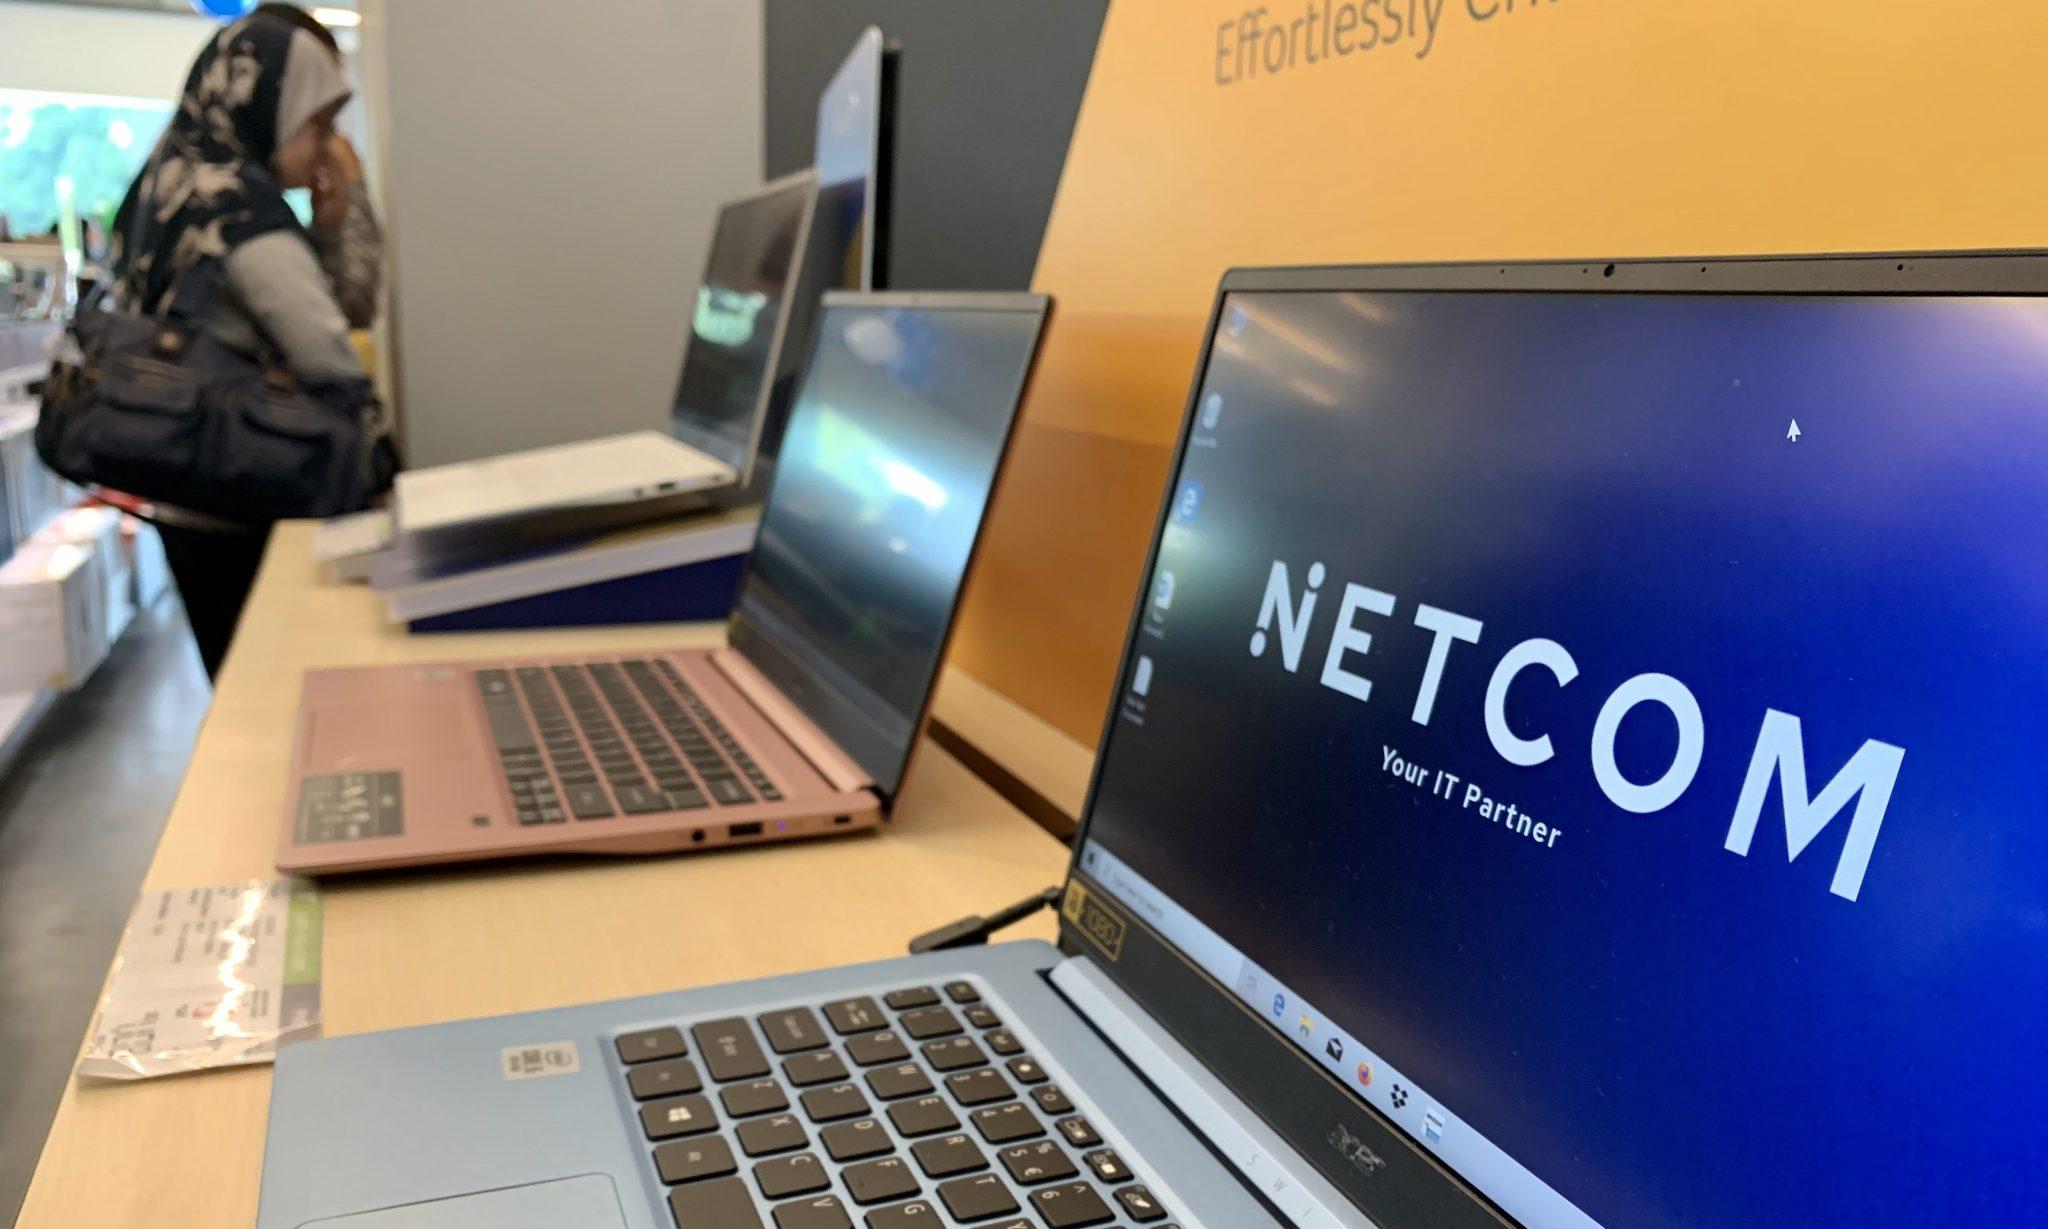 Netcom Computer House unveils new look in latest rebrand